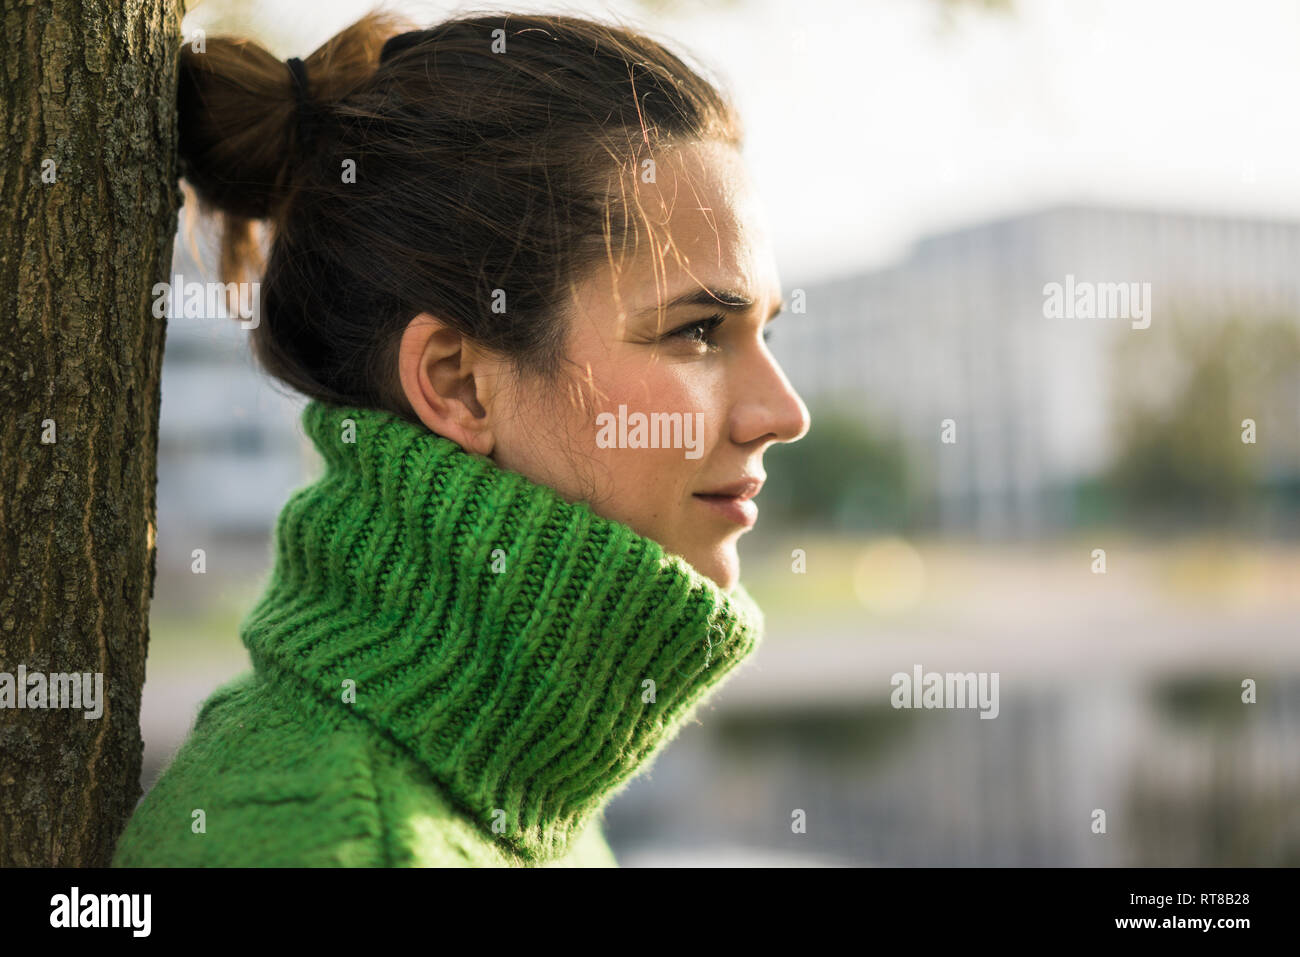 Profile of relaxed woman wearing green turtleneck pullover leaning against tree trunk Stock Photo